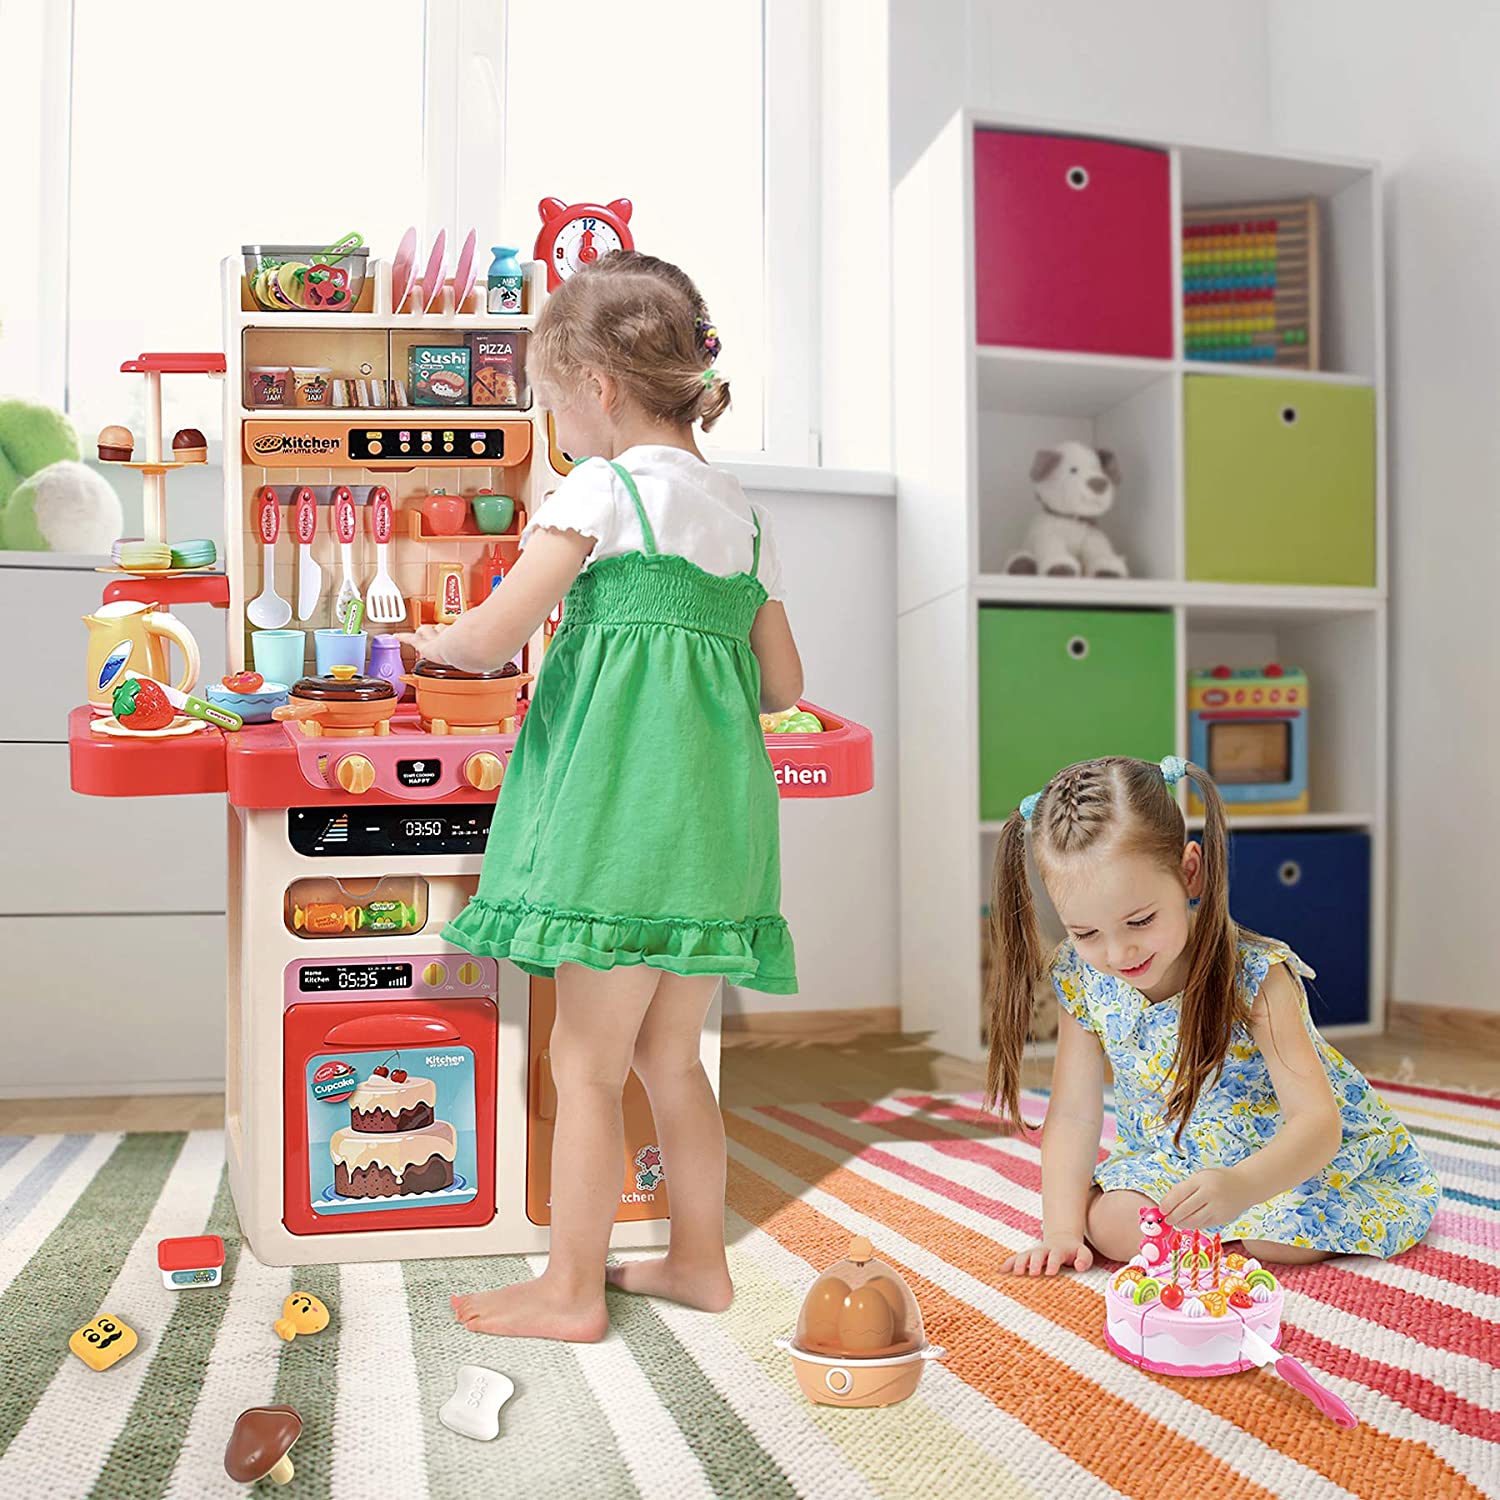 kitchen Set, with Musics and Lights Toys Kitchen Accessories